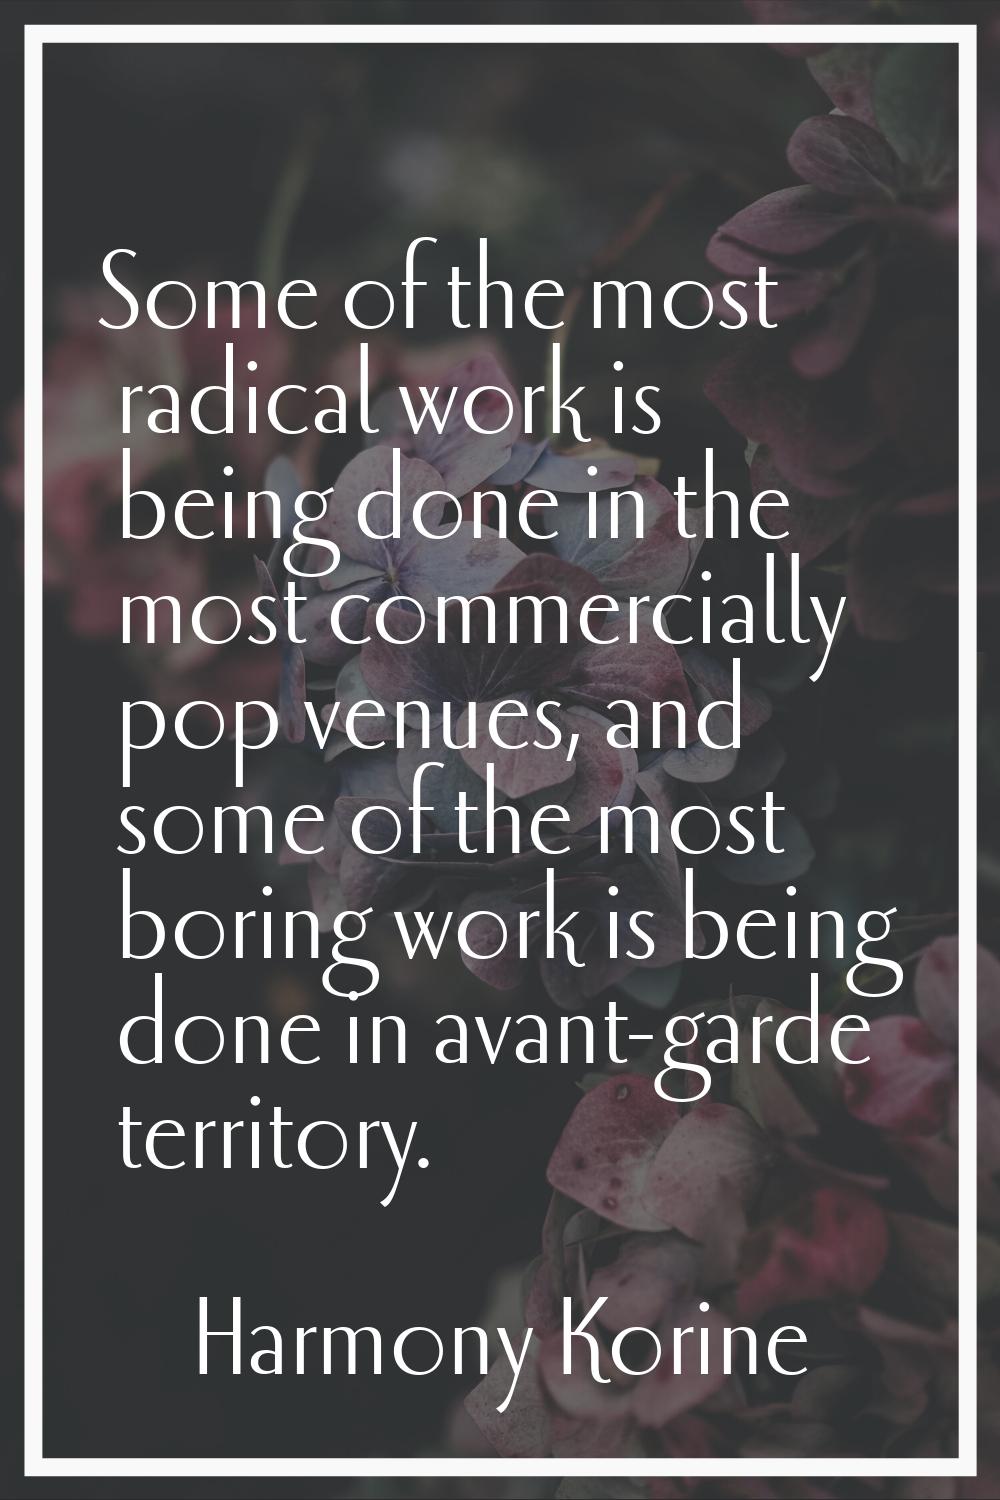 Some of the most radical work is being done in the most commercially pop venues, and some of the mo